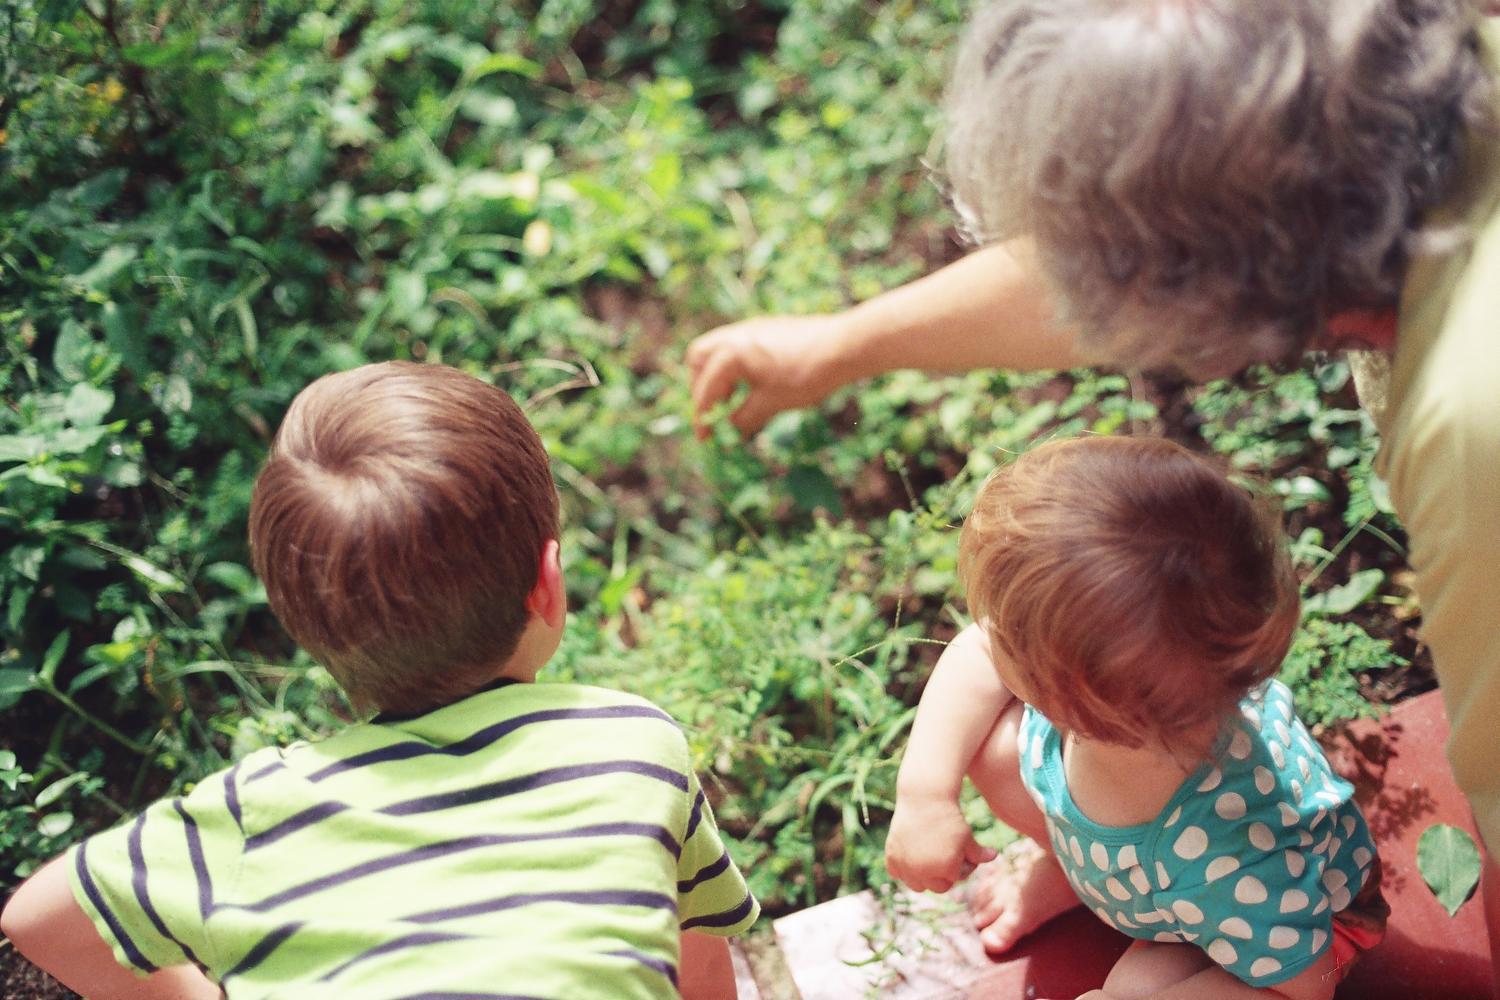 two young children and a grandmother or older caretaker are observing something in the garden.